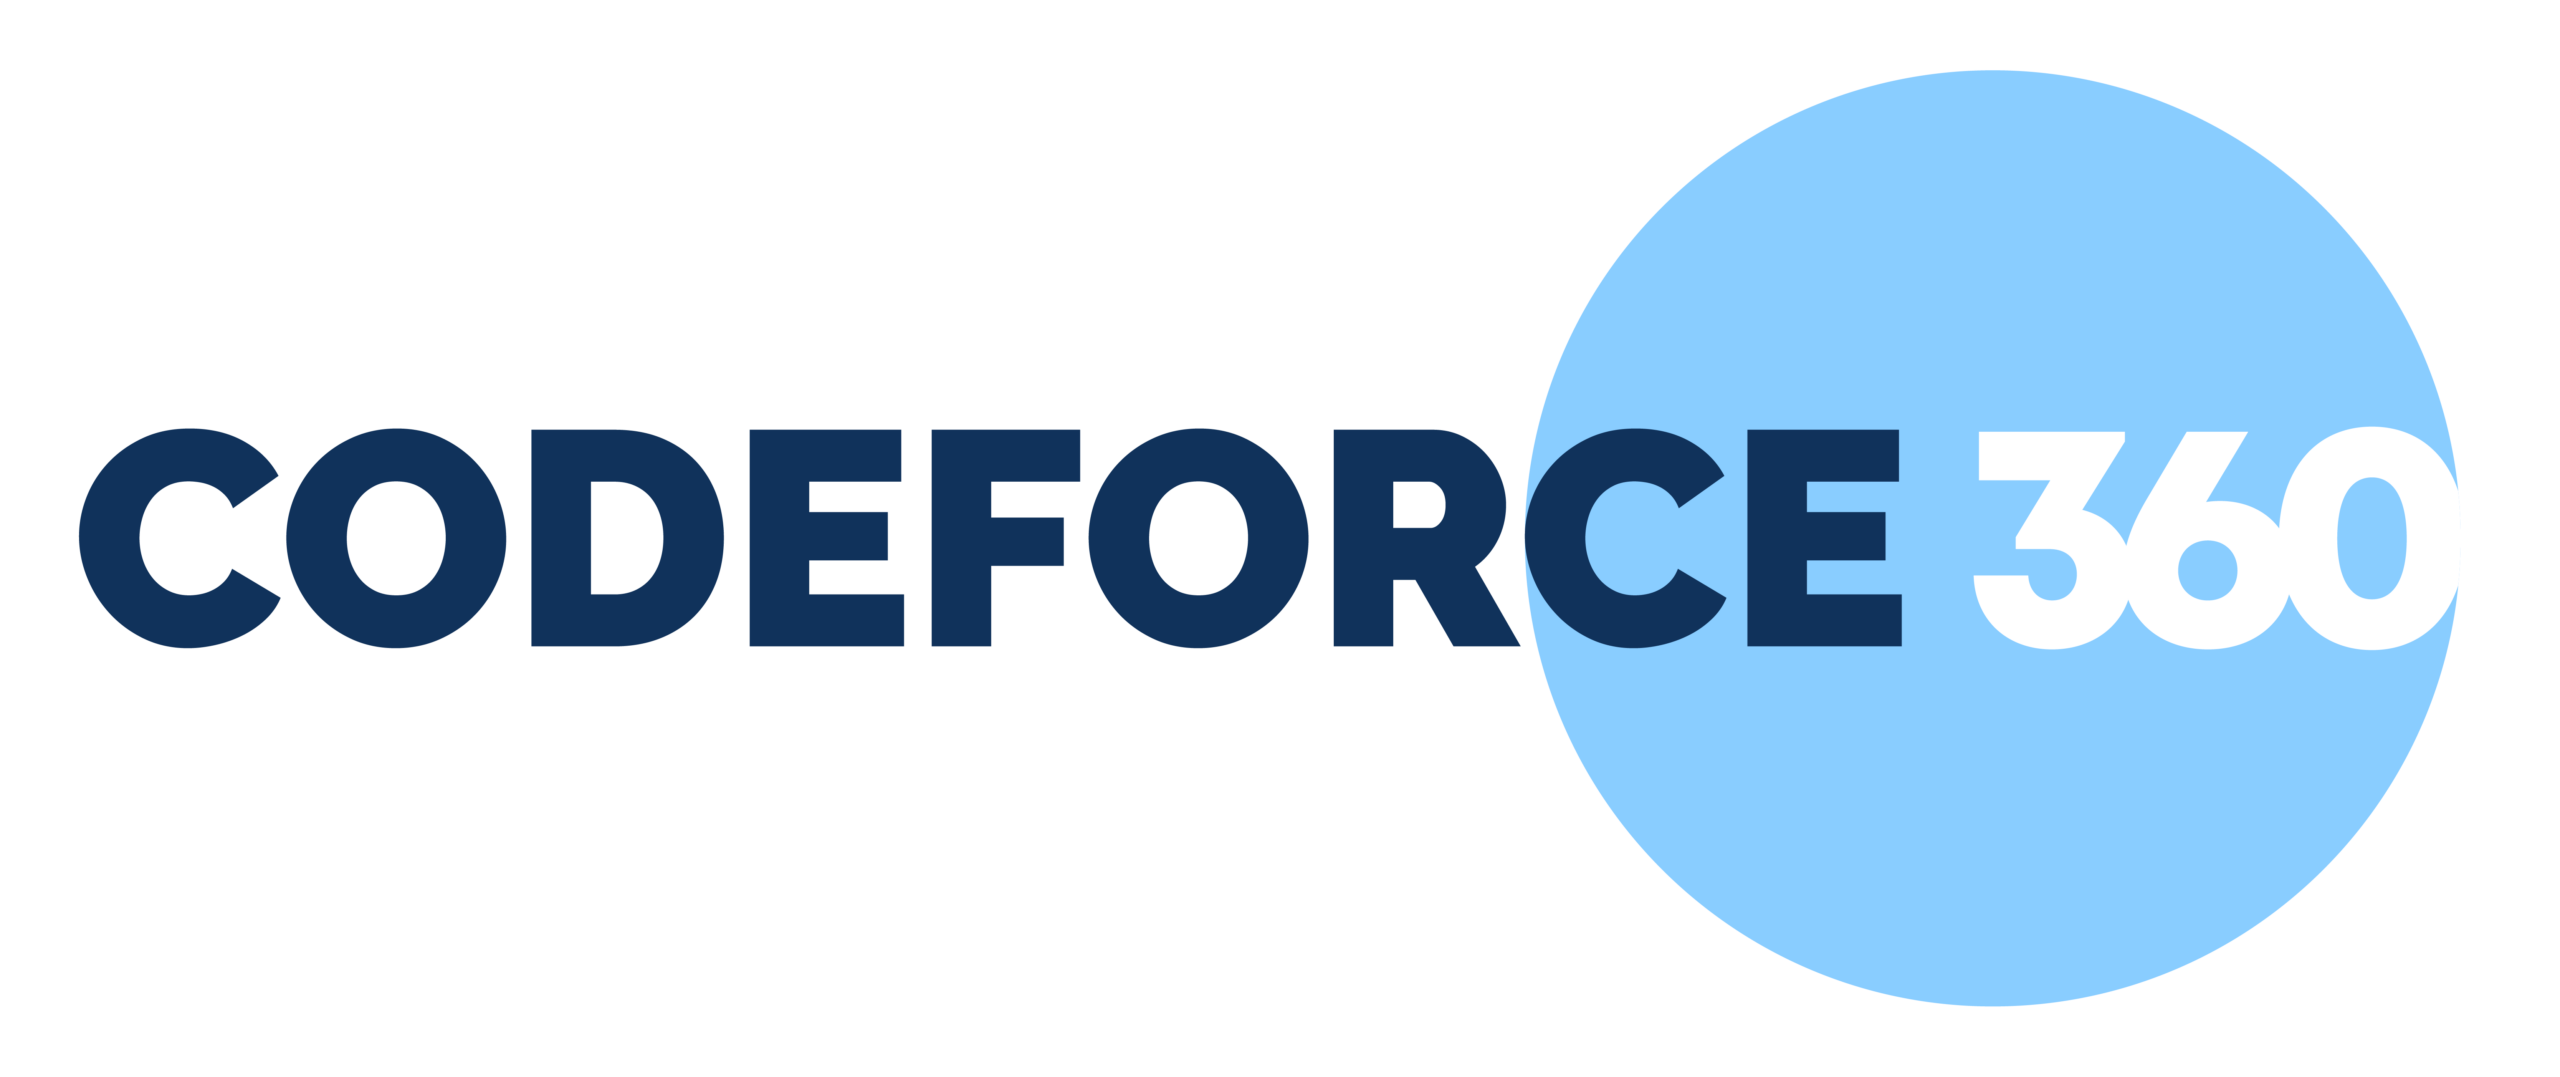 CodeForce 360 | America's fastest growing Technology Staffing Company